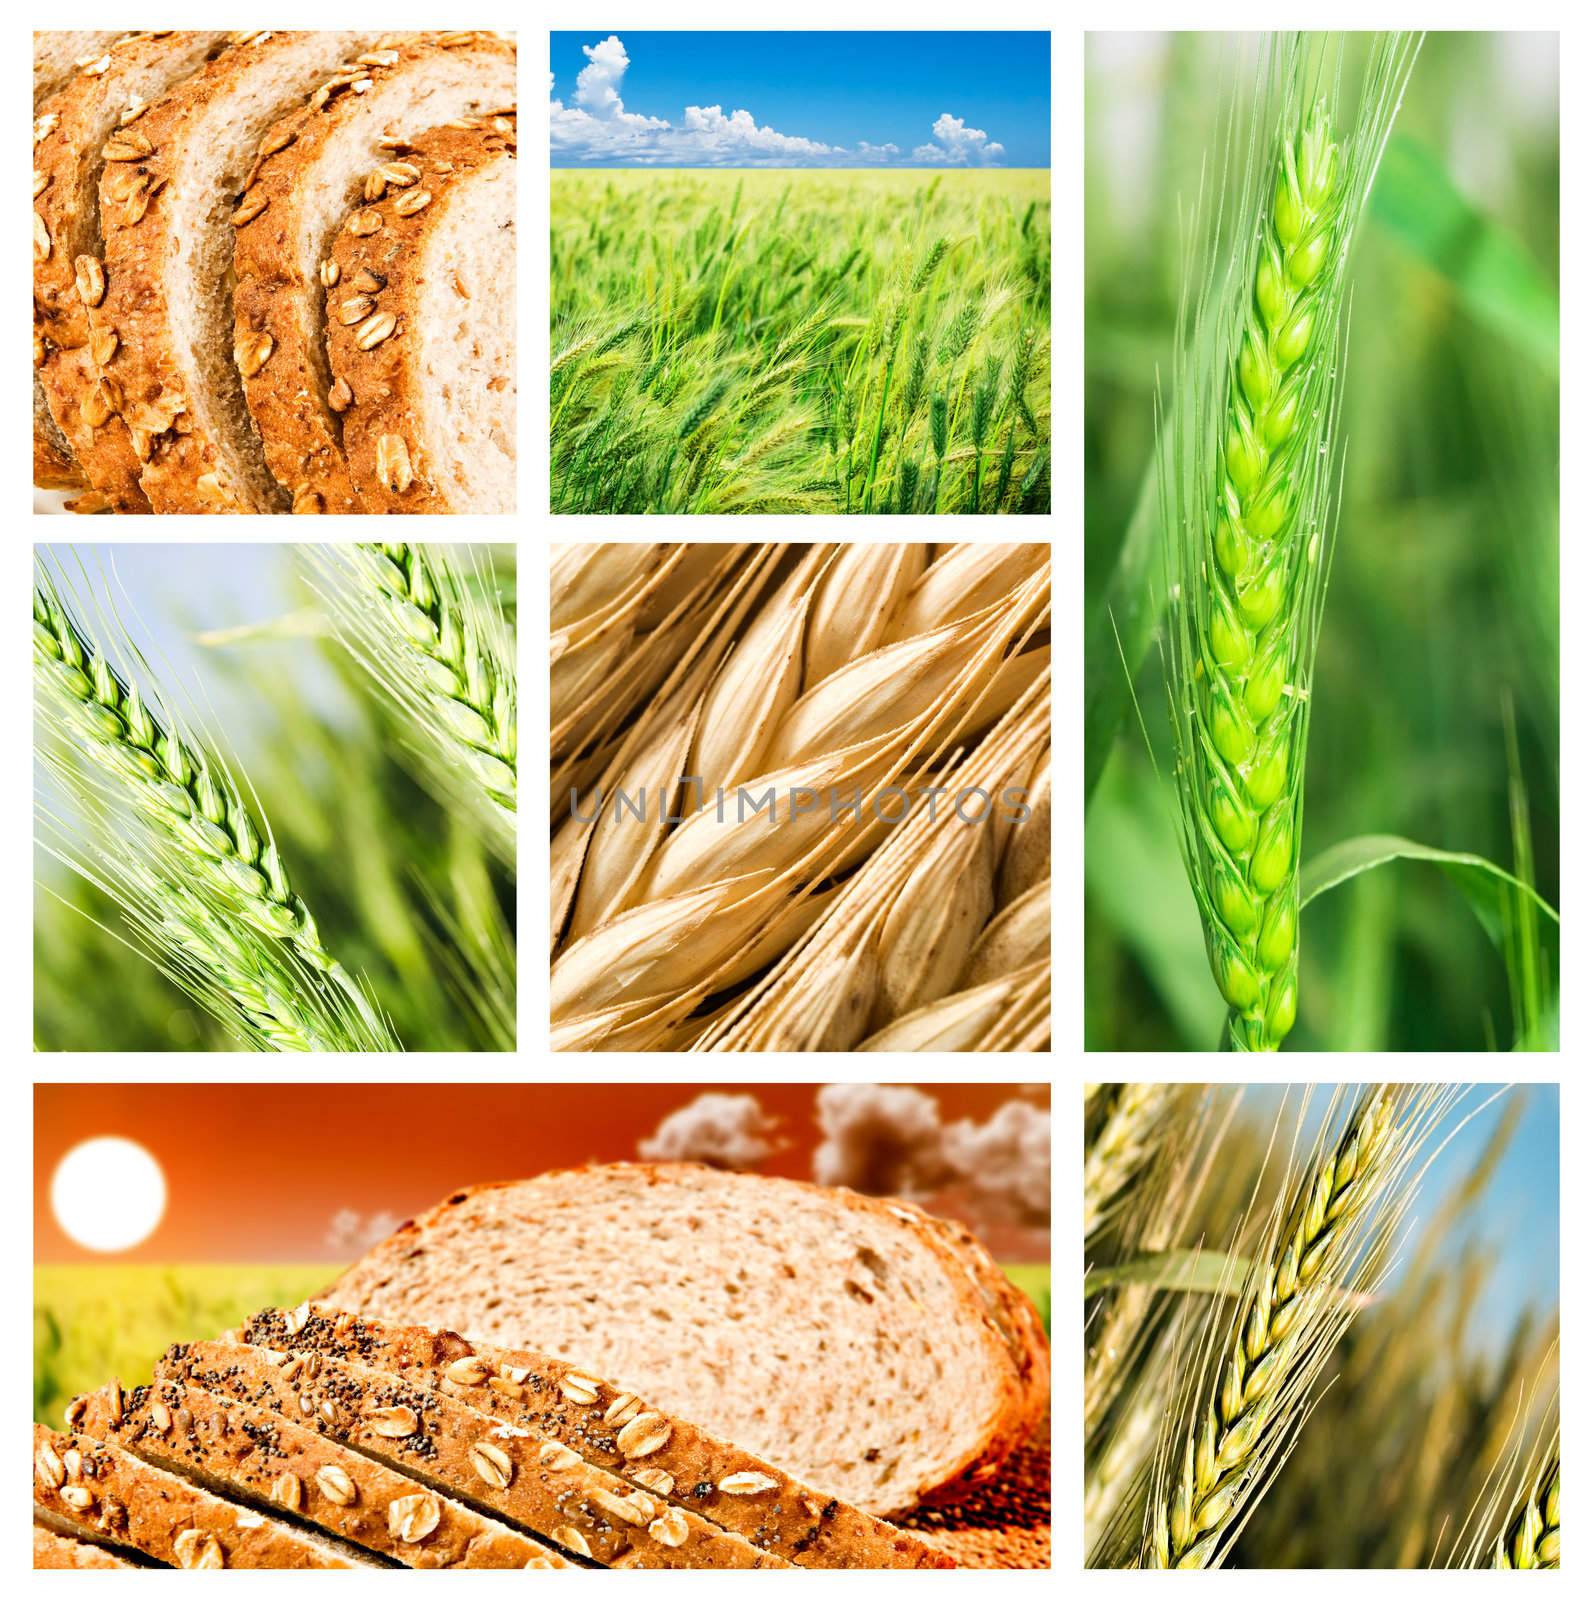 Collage of wheat and wheat products by tish1